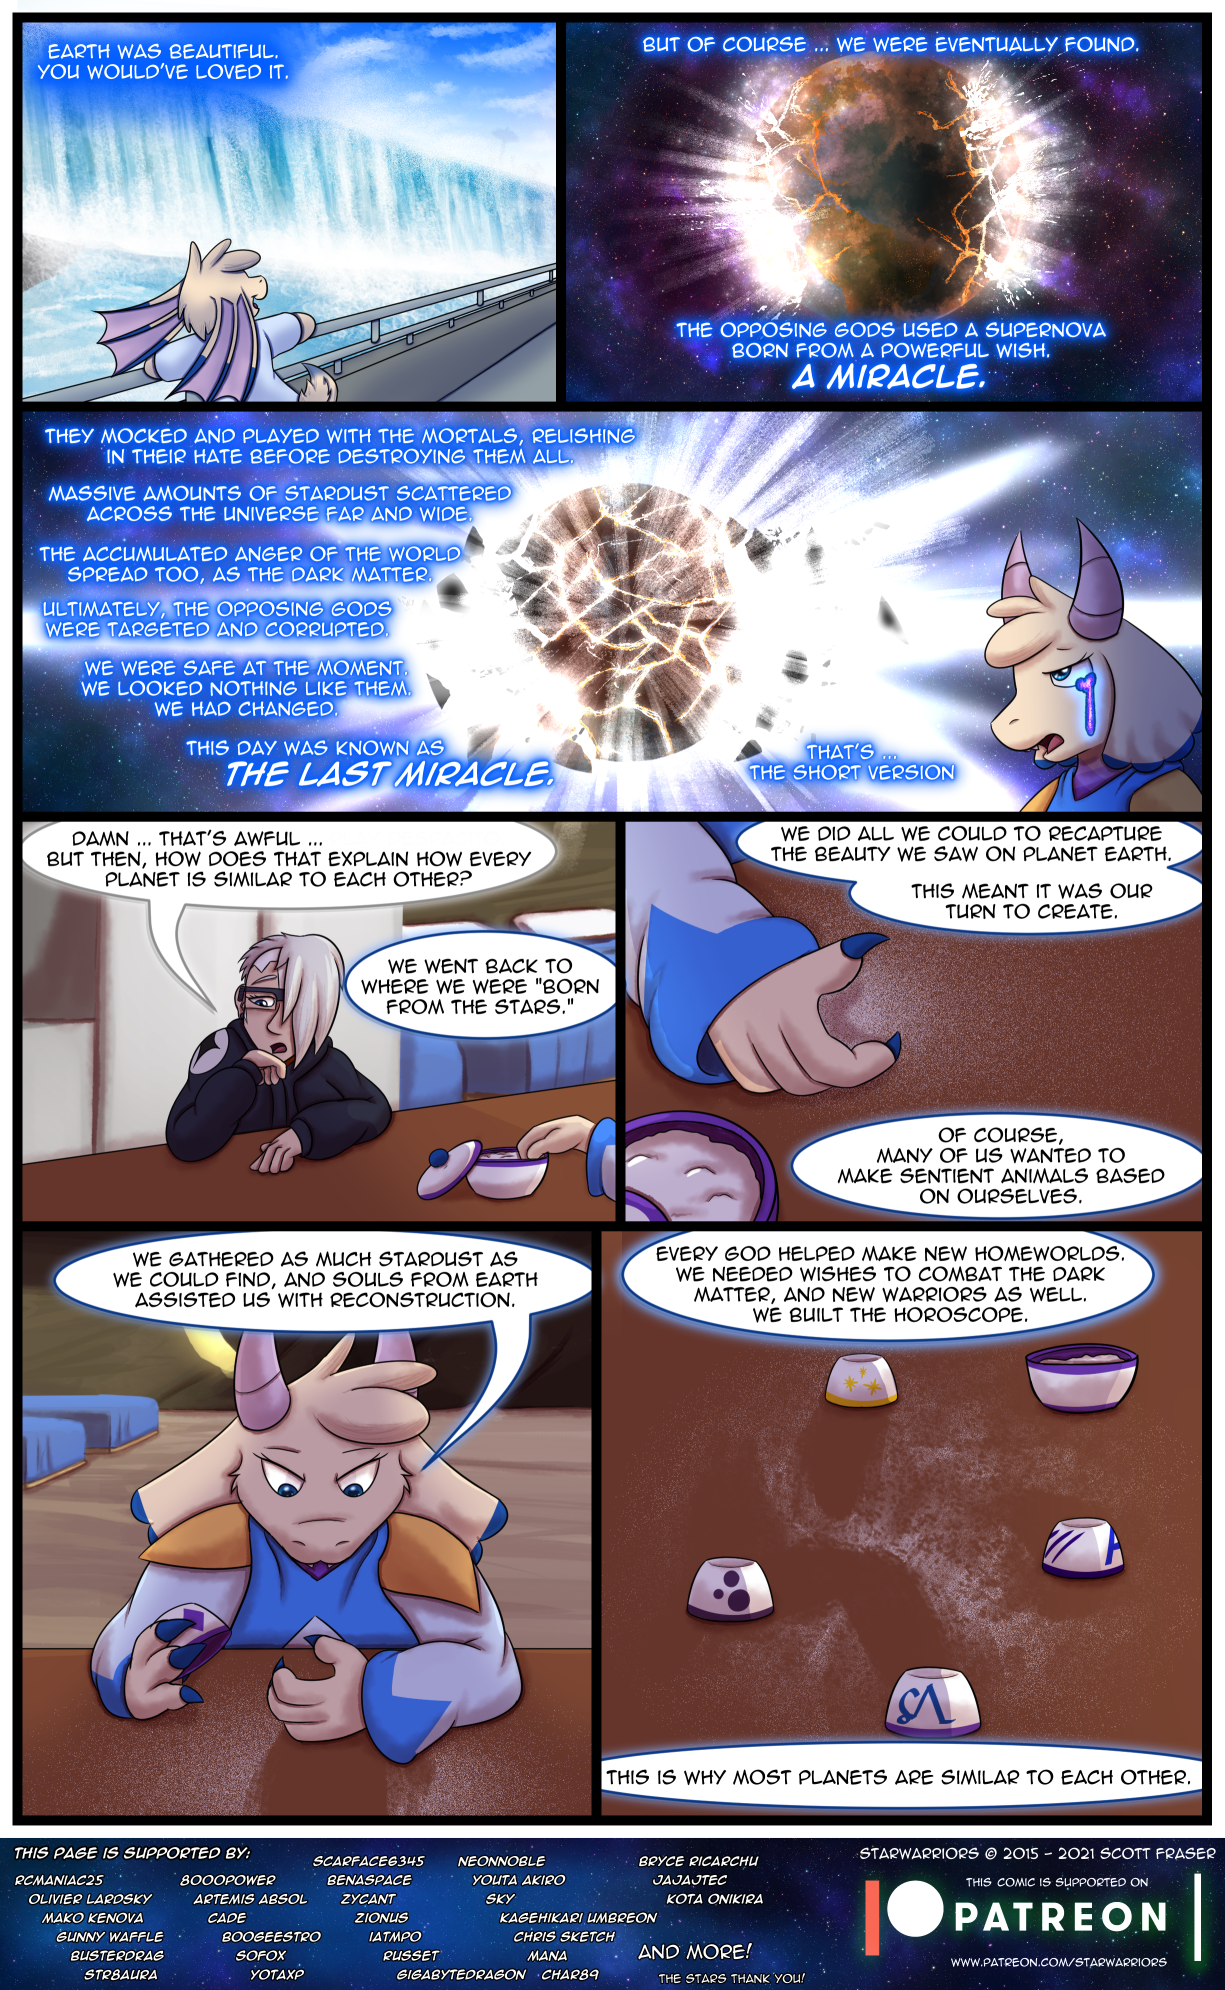 Ch5 Page 54 – Last Miracle